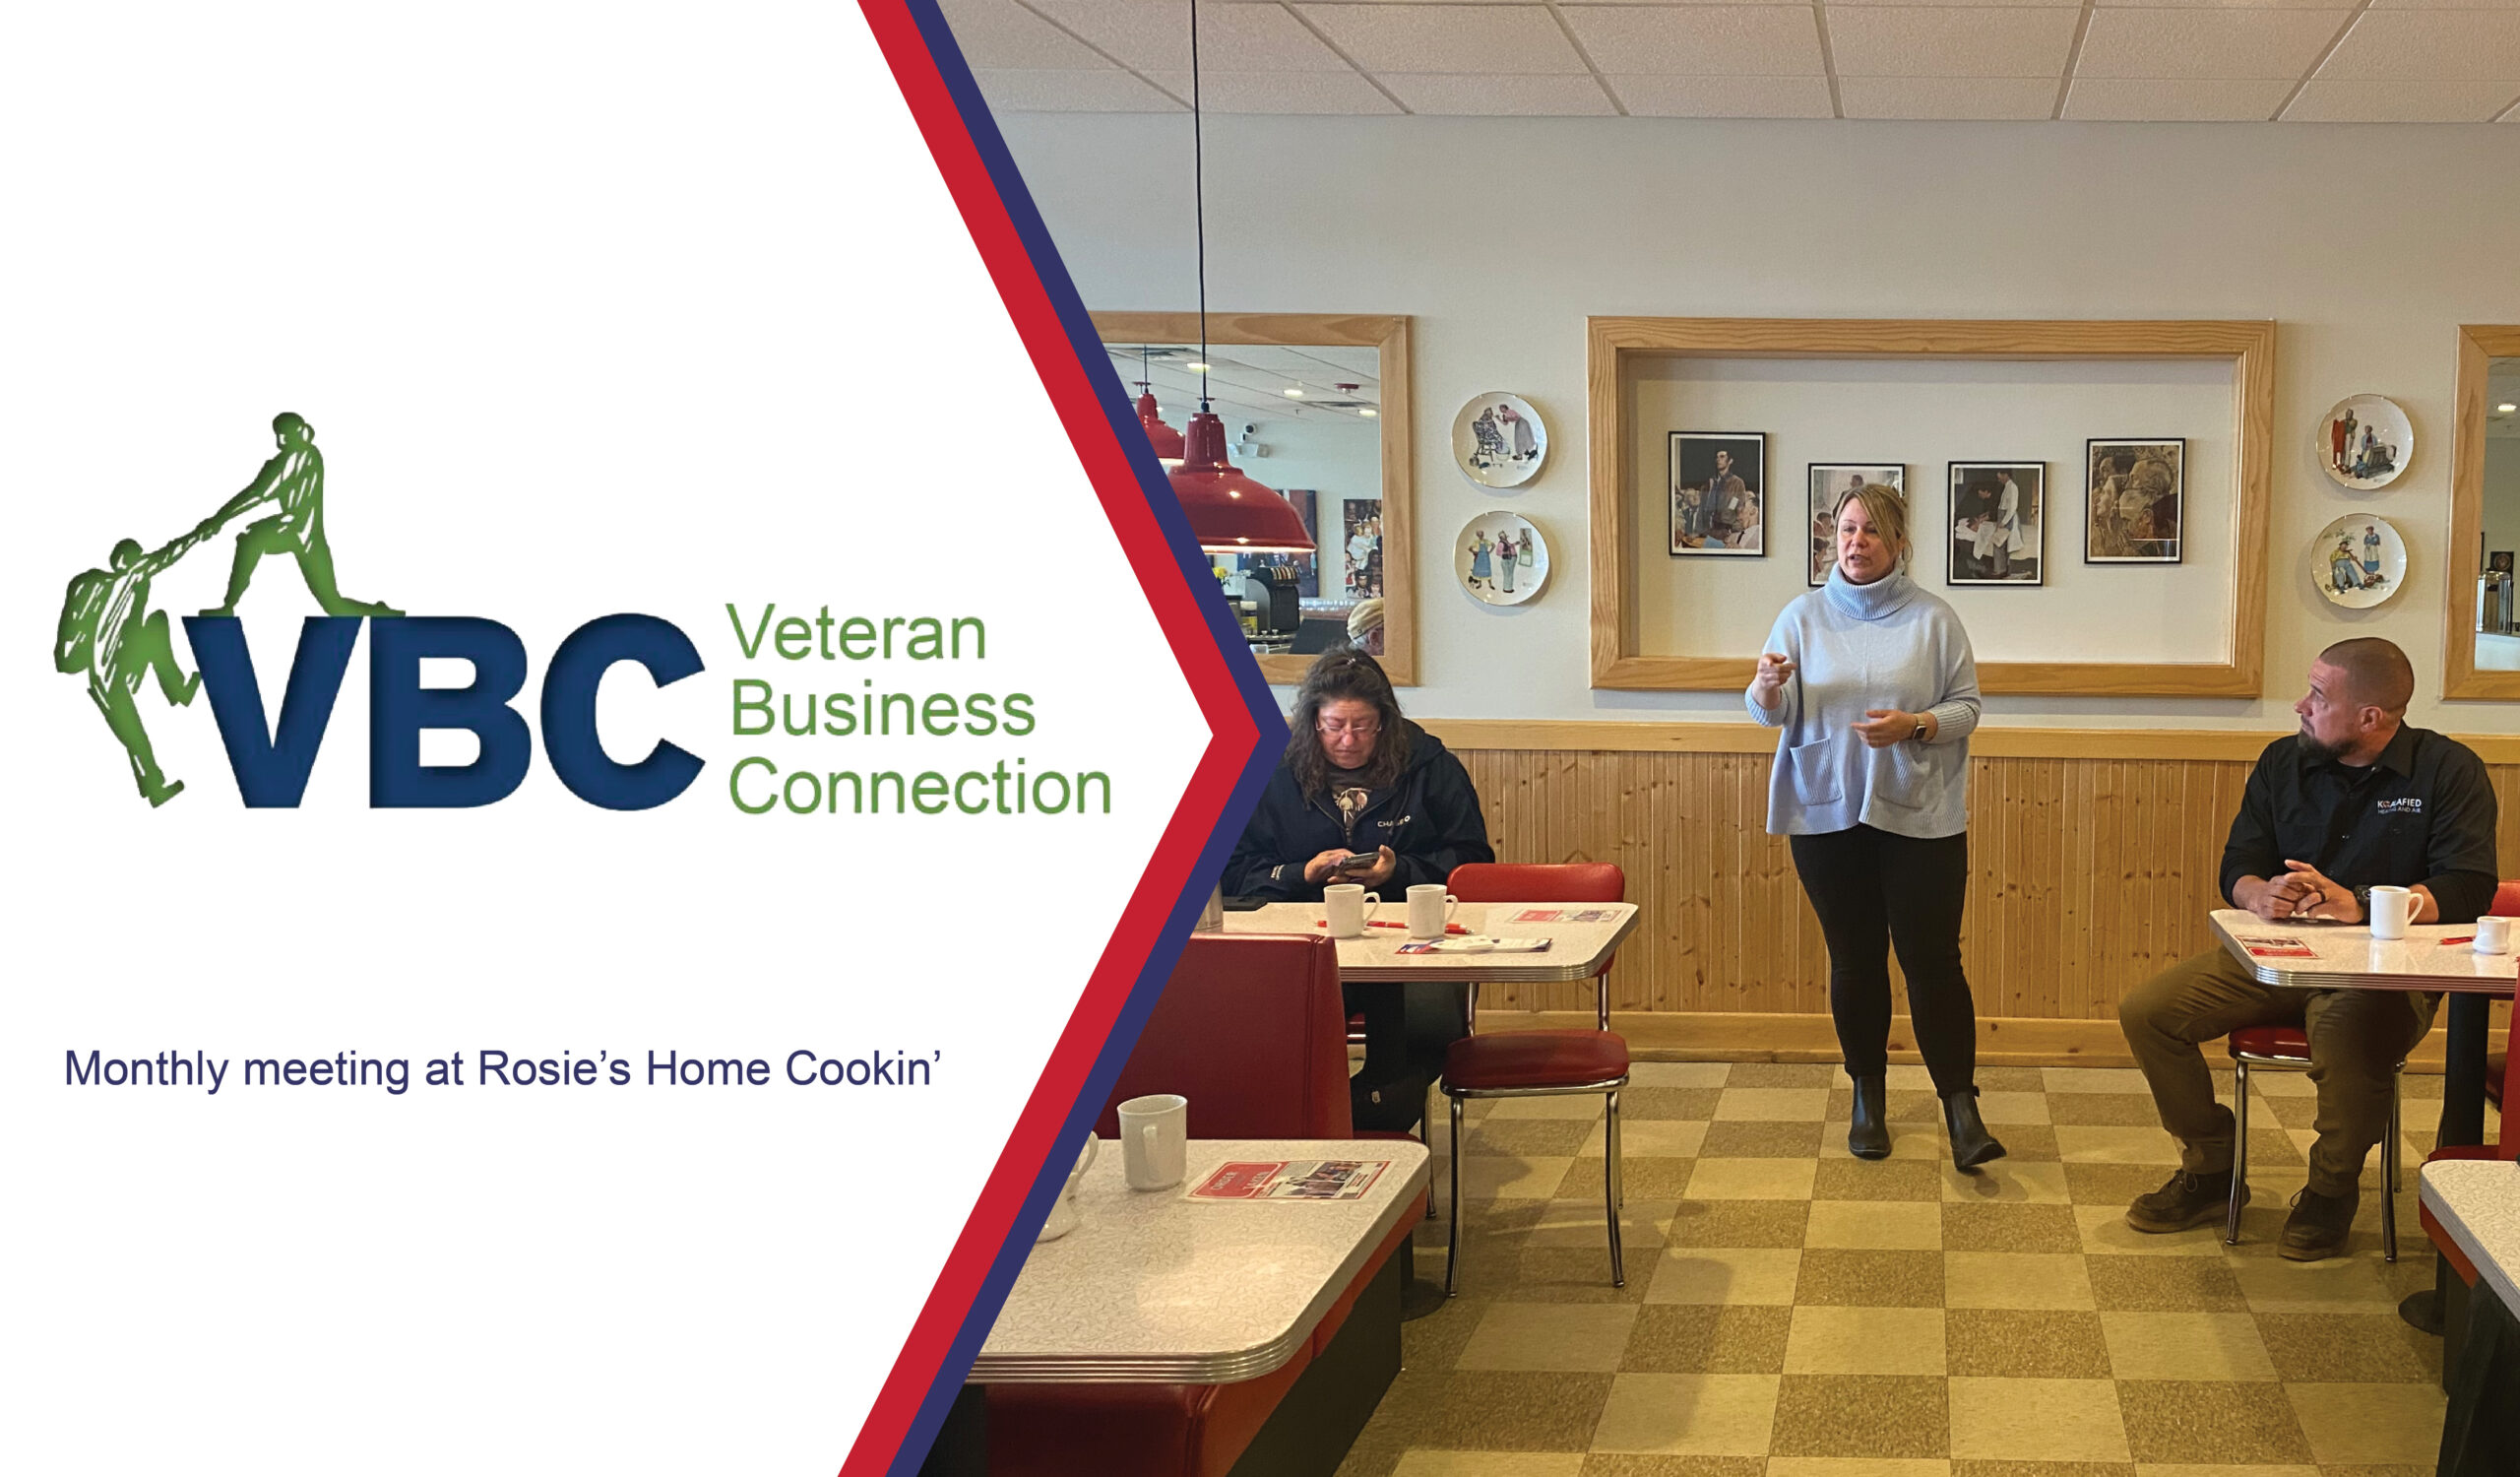 Veteran Business Connection - networking meeting